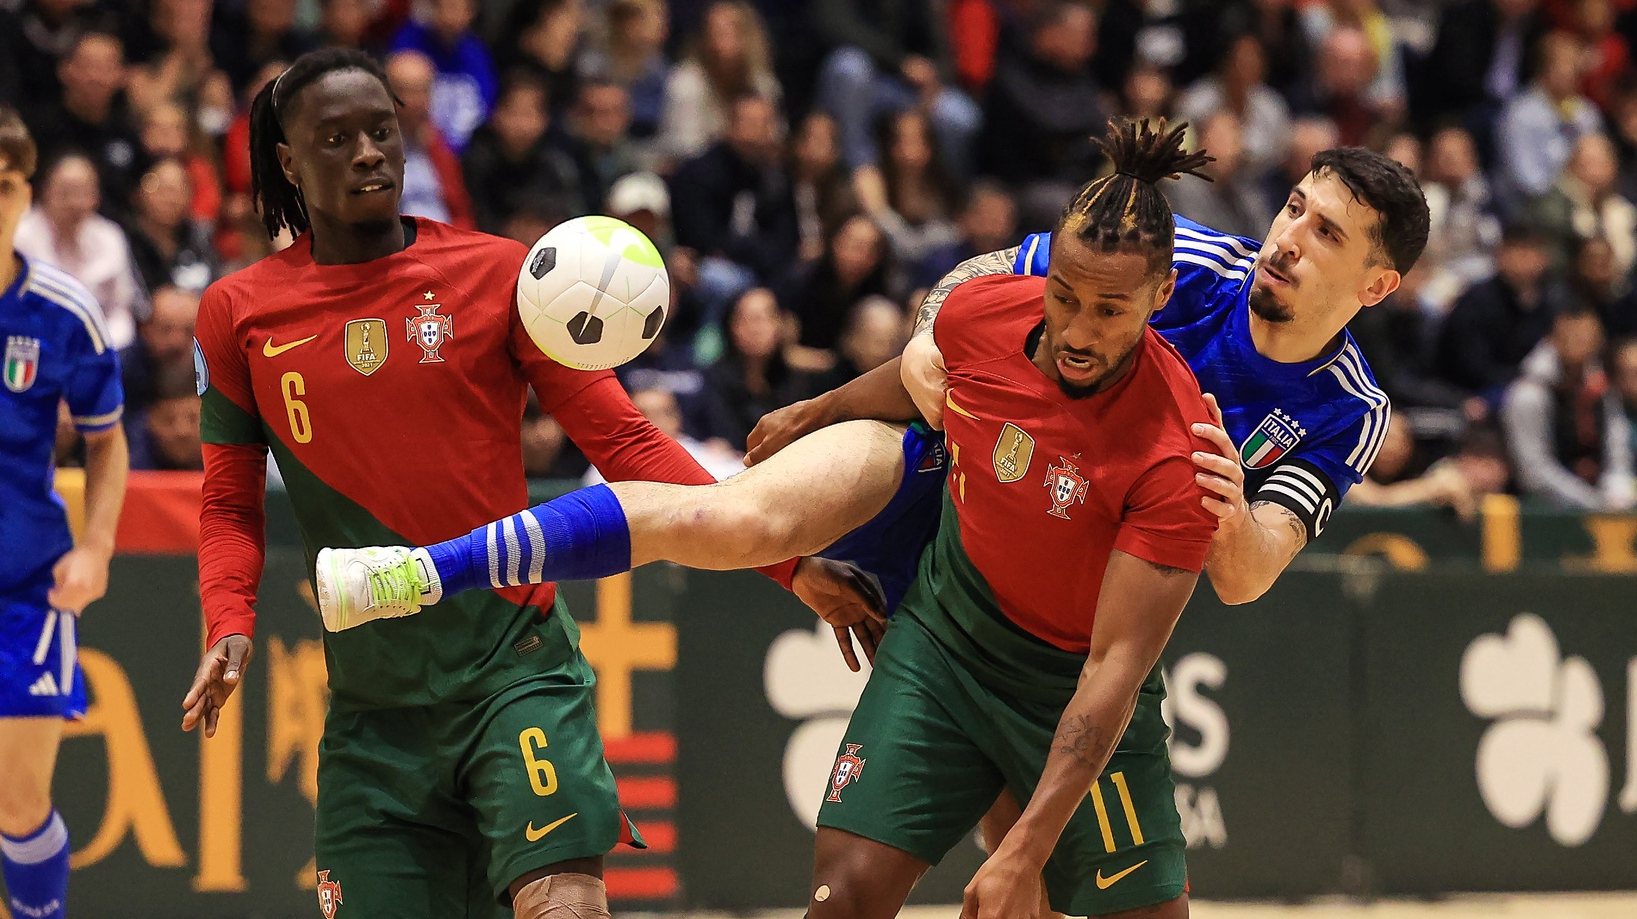 Portugal&#039;s Zicky (L) and Pany (C) in action against Italy&#039;s Carmelo Musumeci (R), during a friendly futsal match ahead of Futsal World Cup 2024 preparation, at Vila do Conde Pavillion, Porto, Portugal, 14 April 2023.JOSE COELHO/LUSA